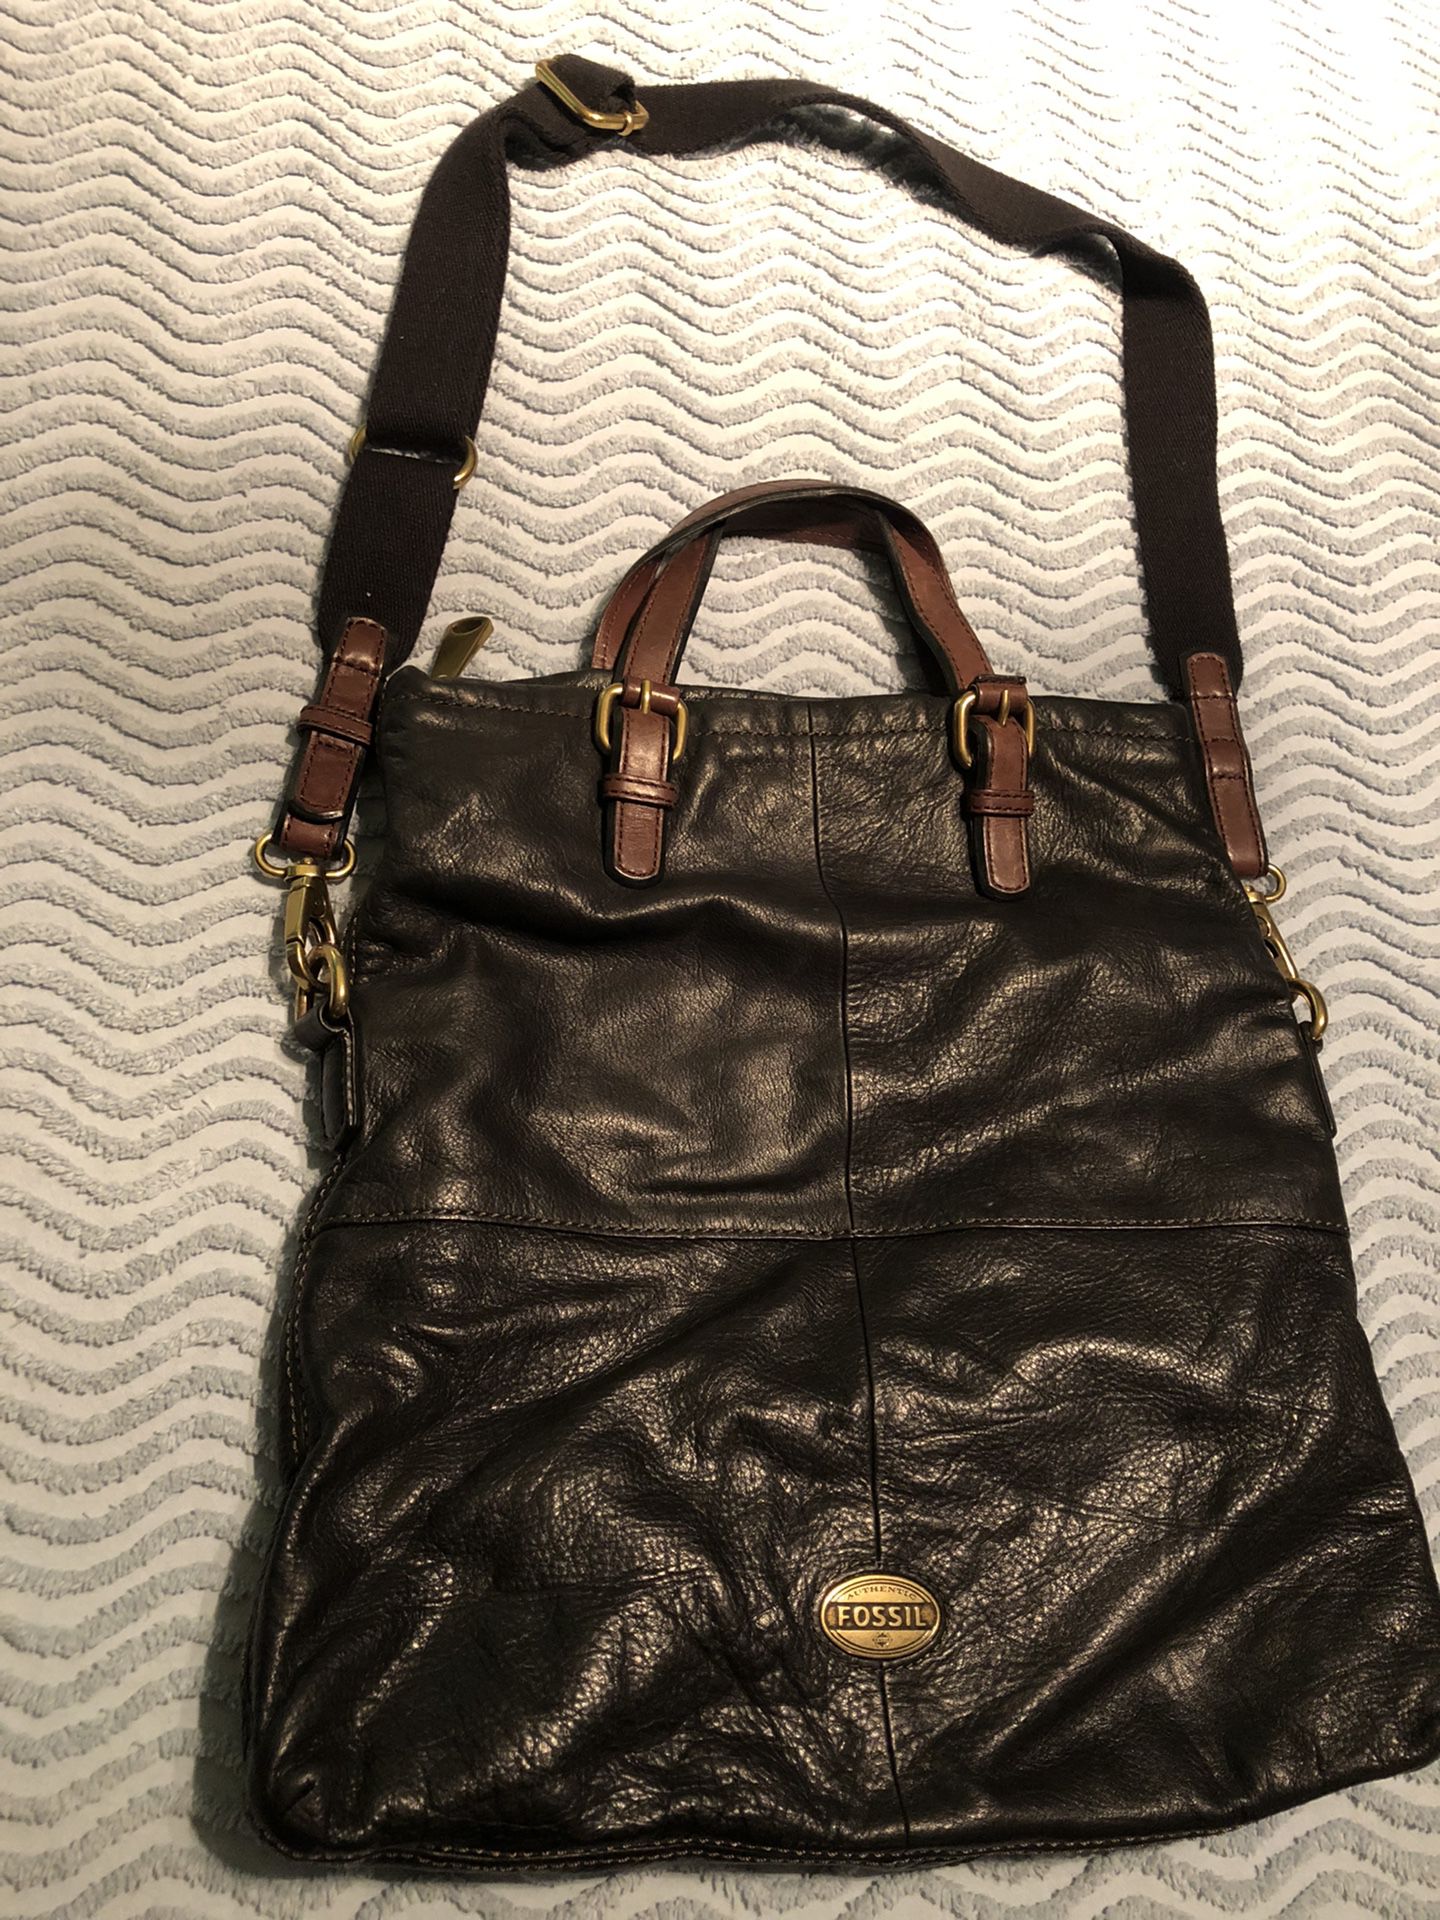 Genuine Leather Fossil Hand Bag/Clutch